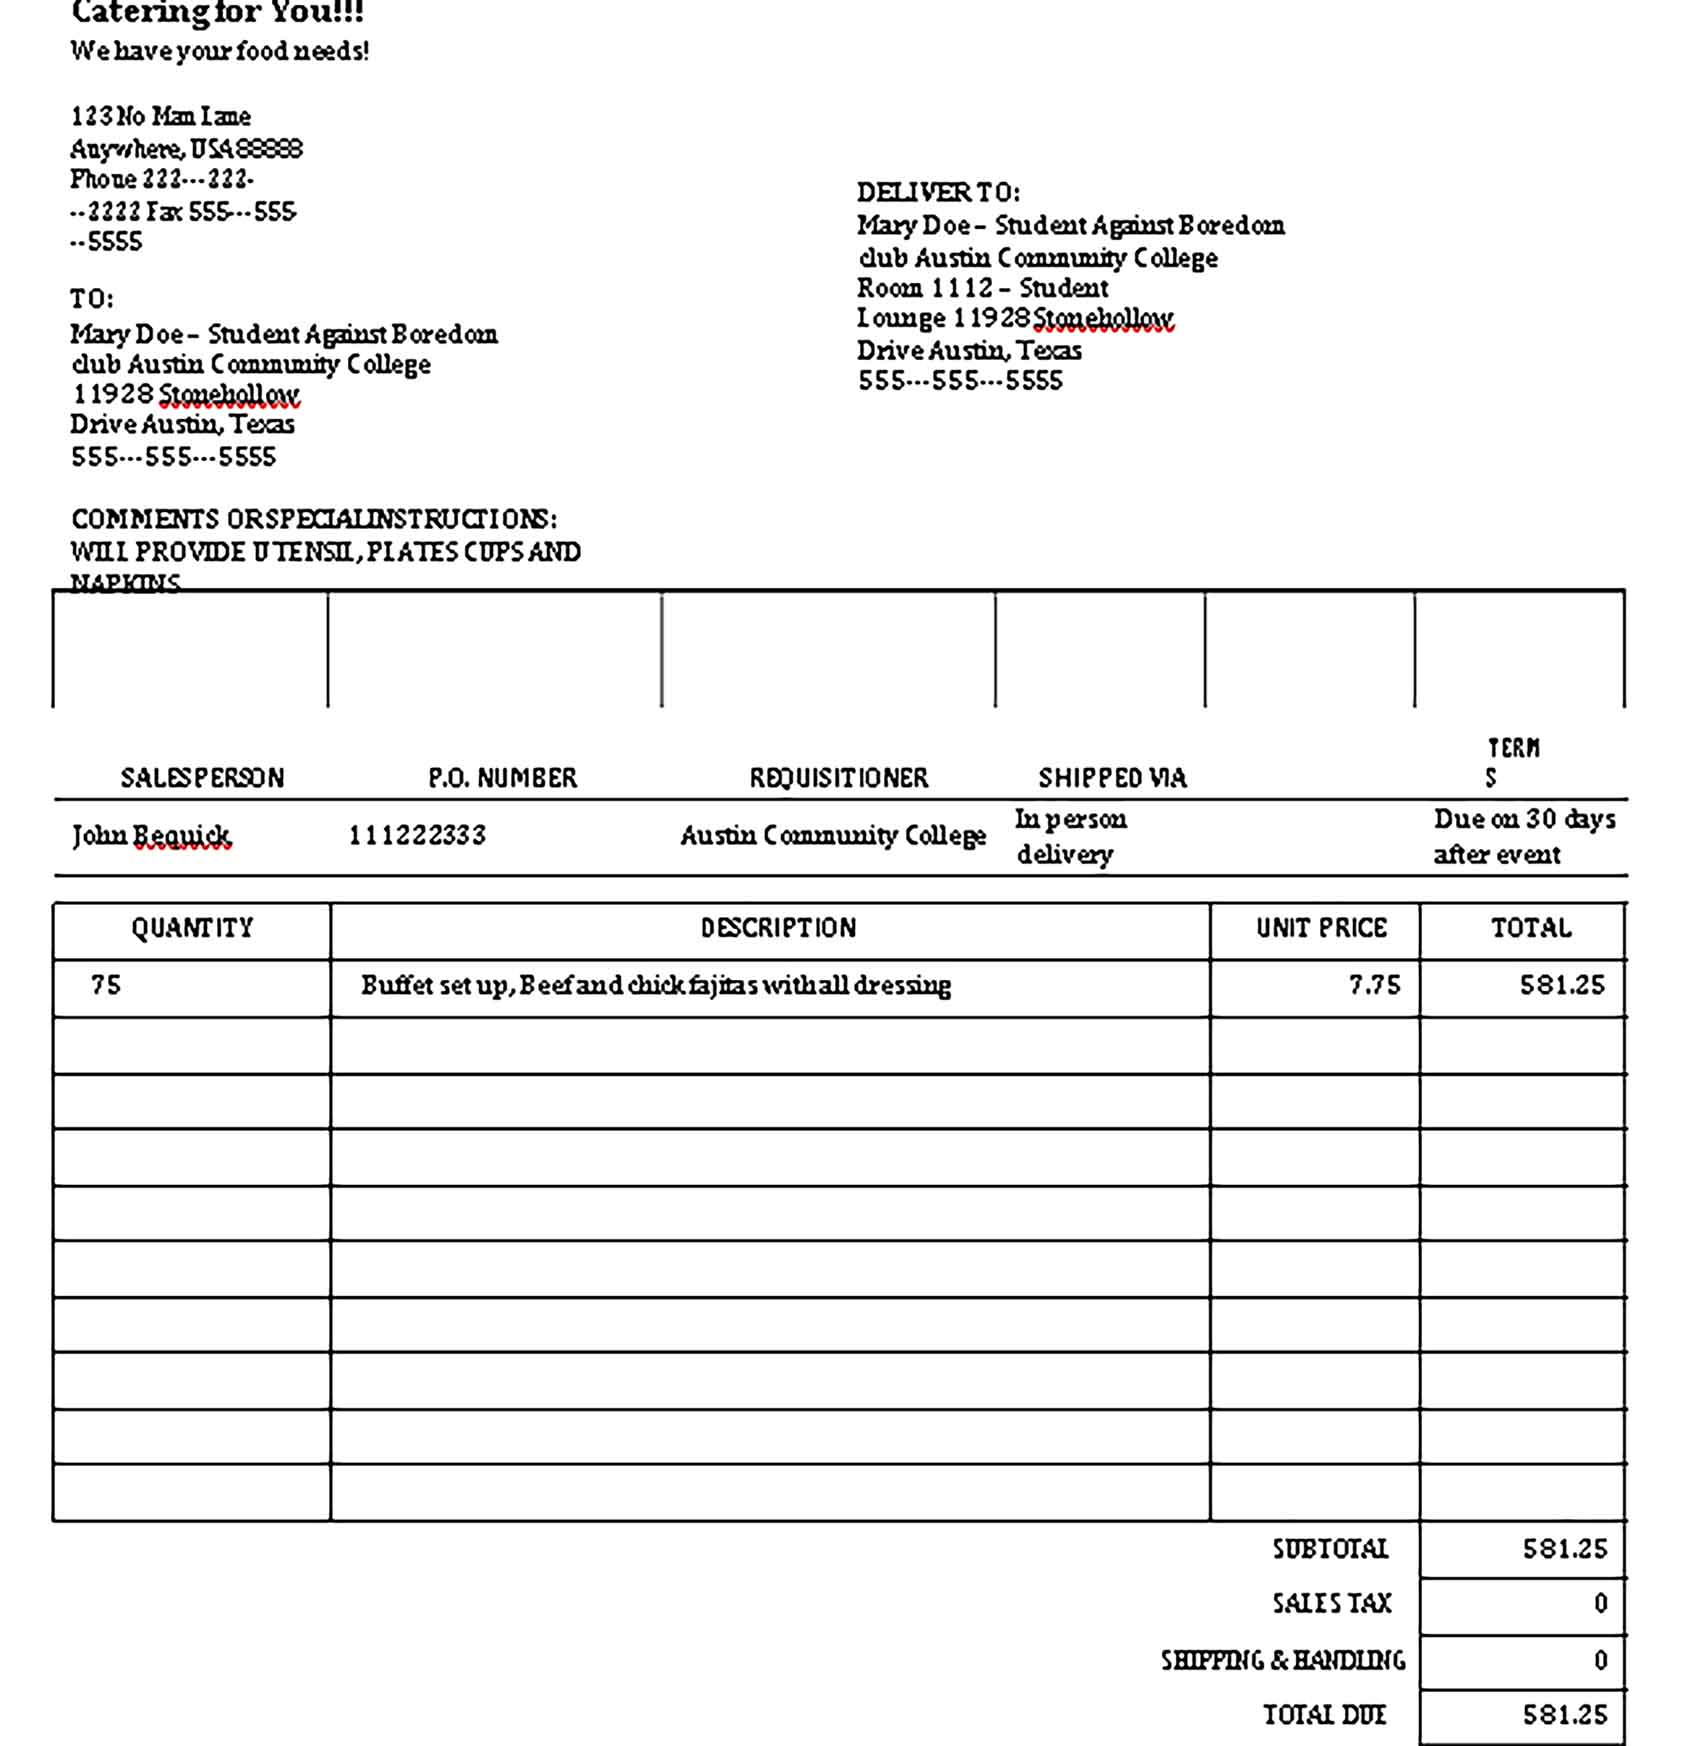 Sample Templates of Catering Invoice